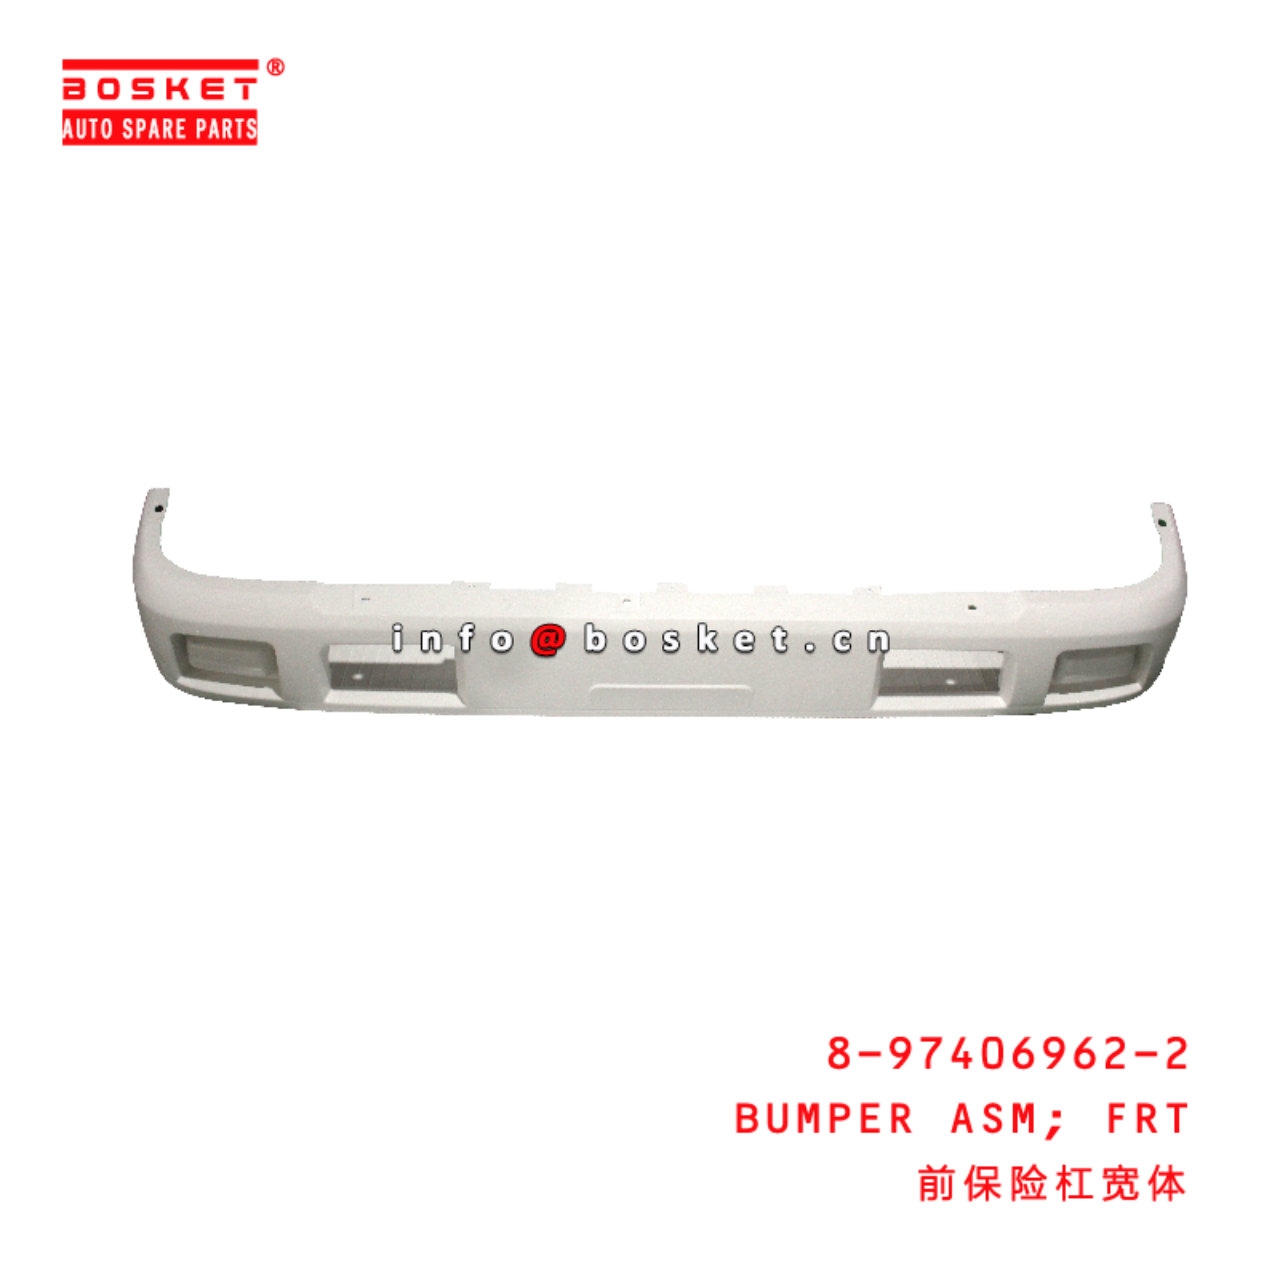 8-97406962-2 Front Bumper Assembly suitable for ISUZU  4HK1 8974069622